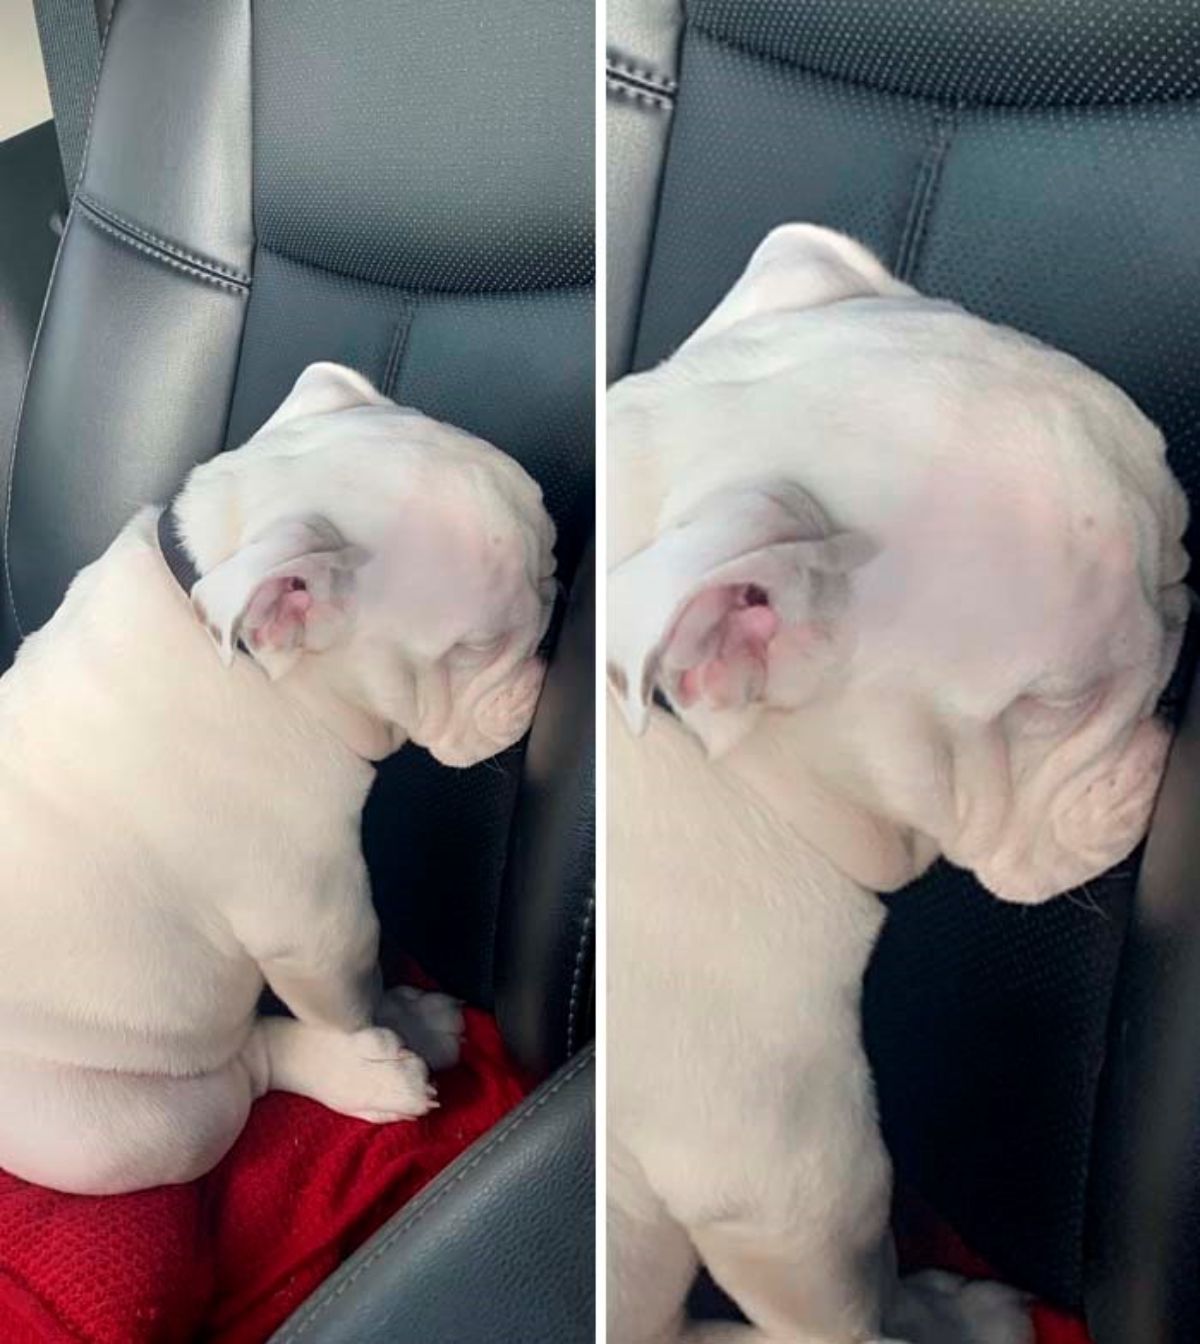 2 photos of a white bulldog pushing its face against a black car seat and looking sad